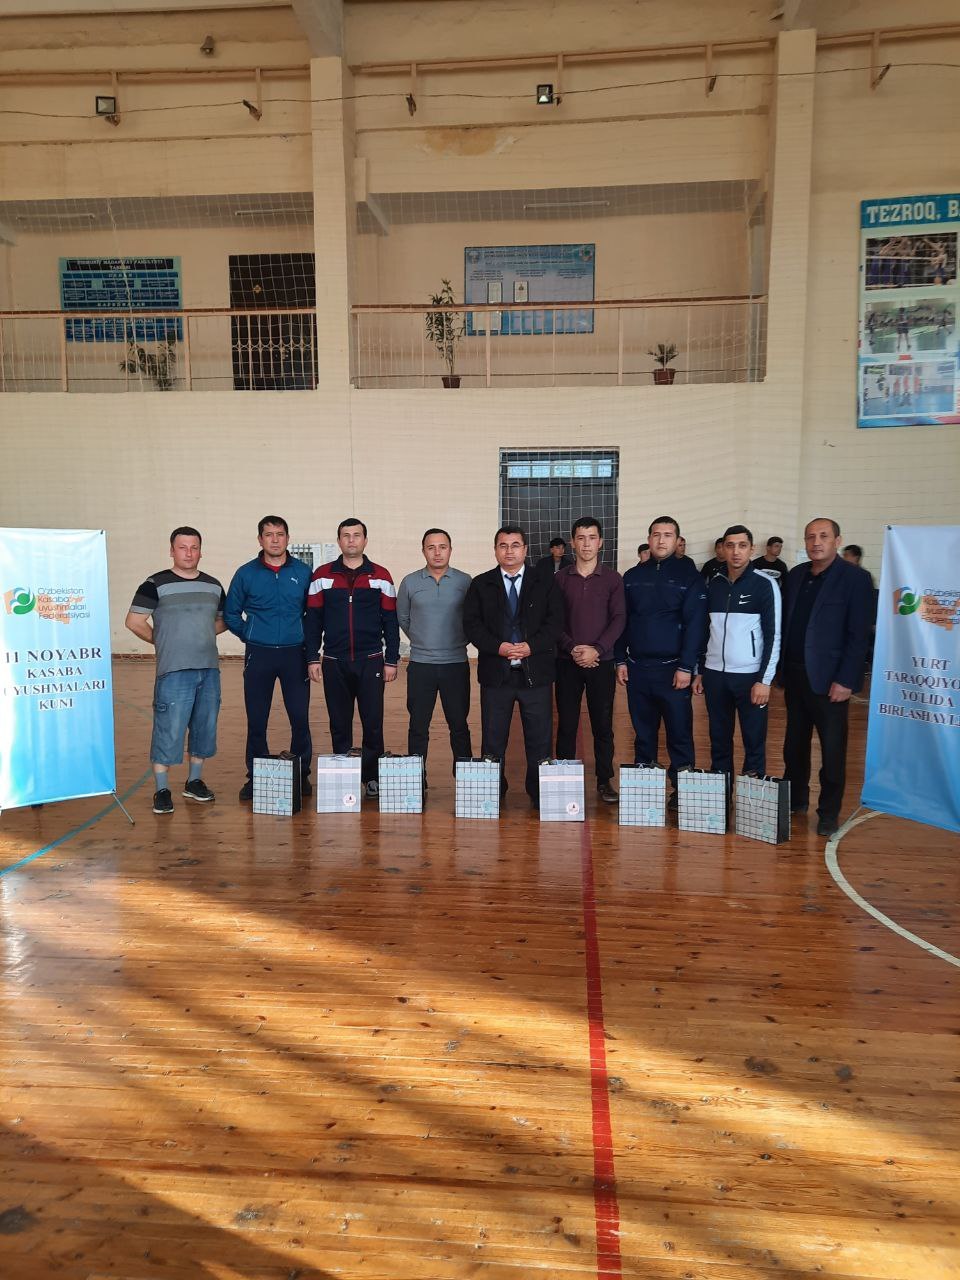 The team of the Faculty of Philology won the first place